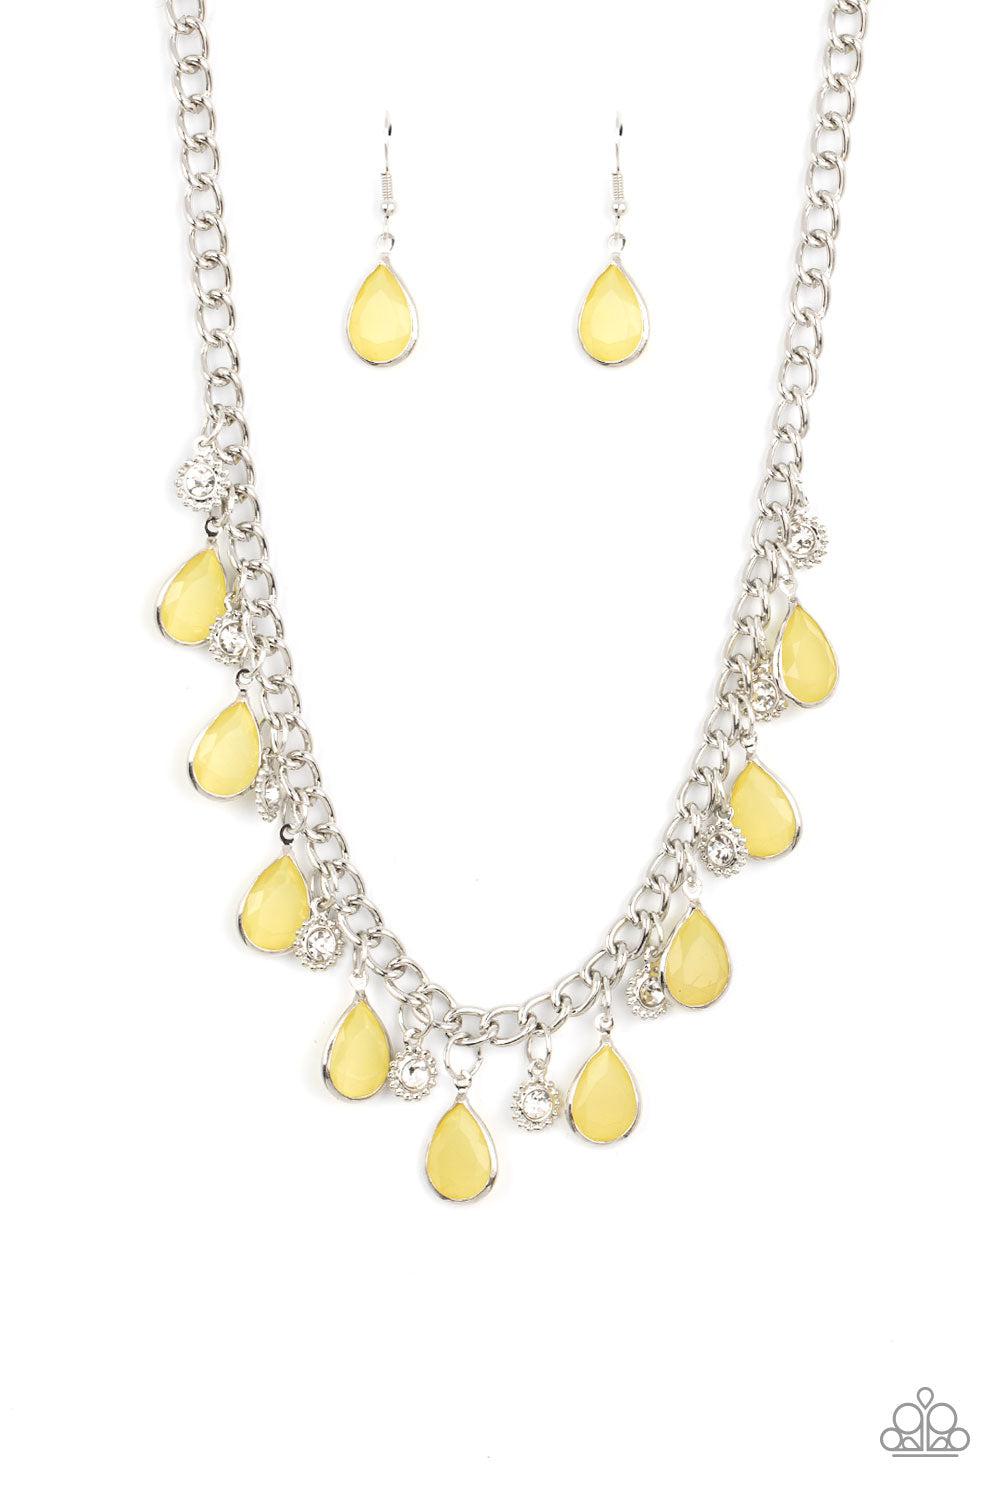 Frosted and Framed Yellow Necklace - Paparazzi Accessories- lightbox - CarasShop.com - $5 Jewelry by Cara Jewels